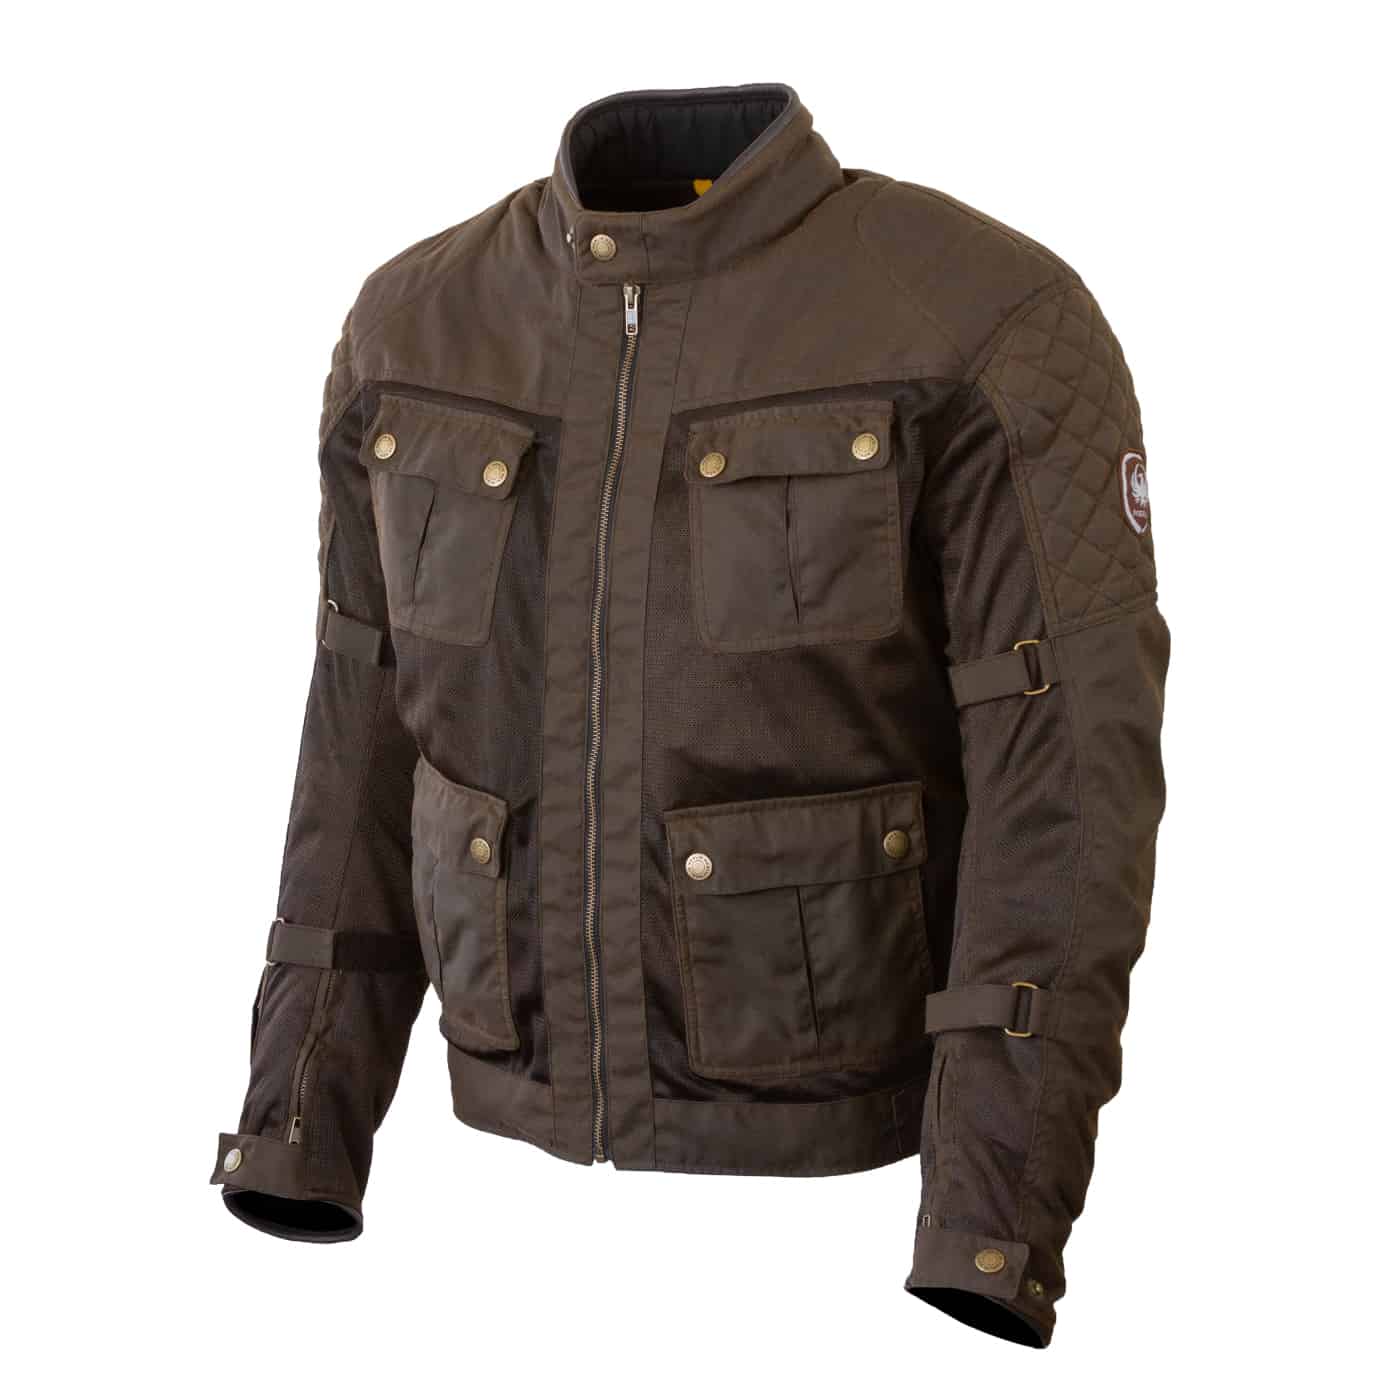 White background image of Merlin Chigwell Utility waxed cotton jacket in brown